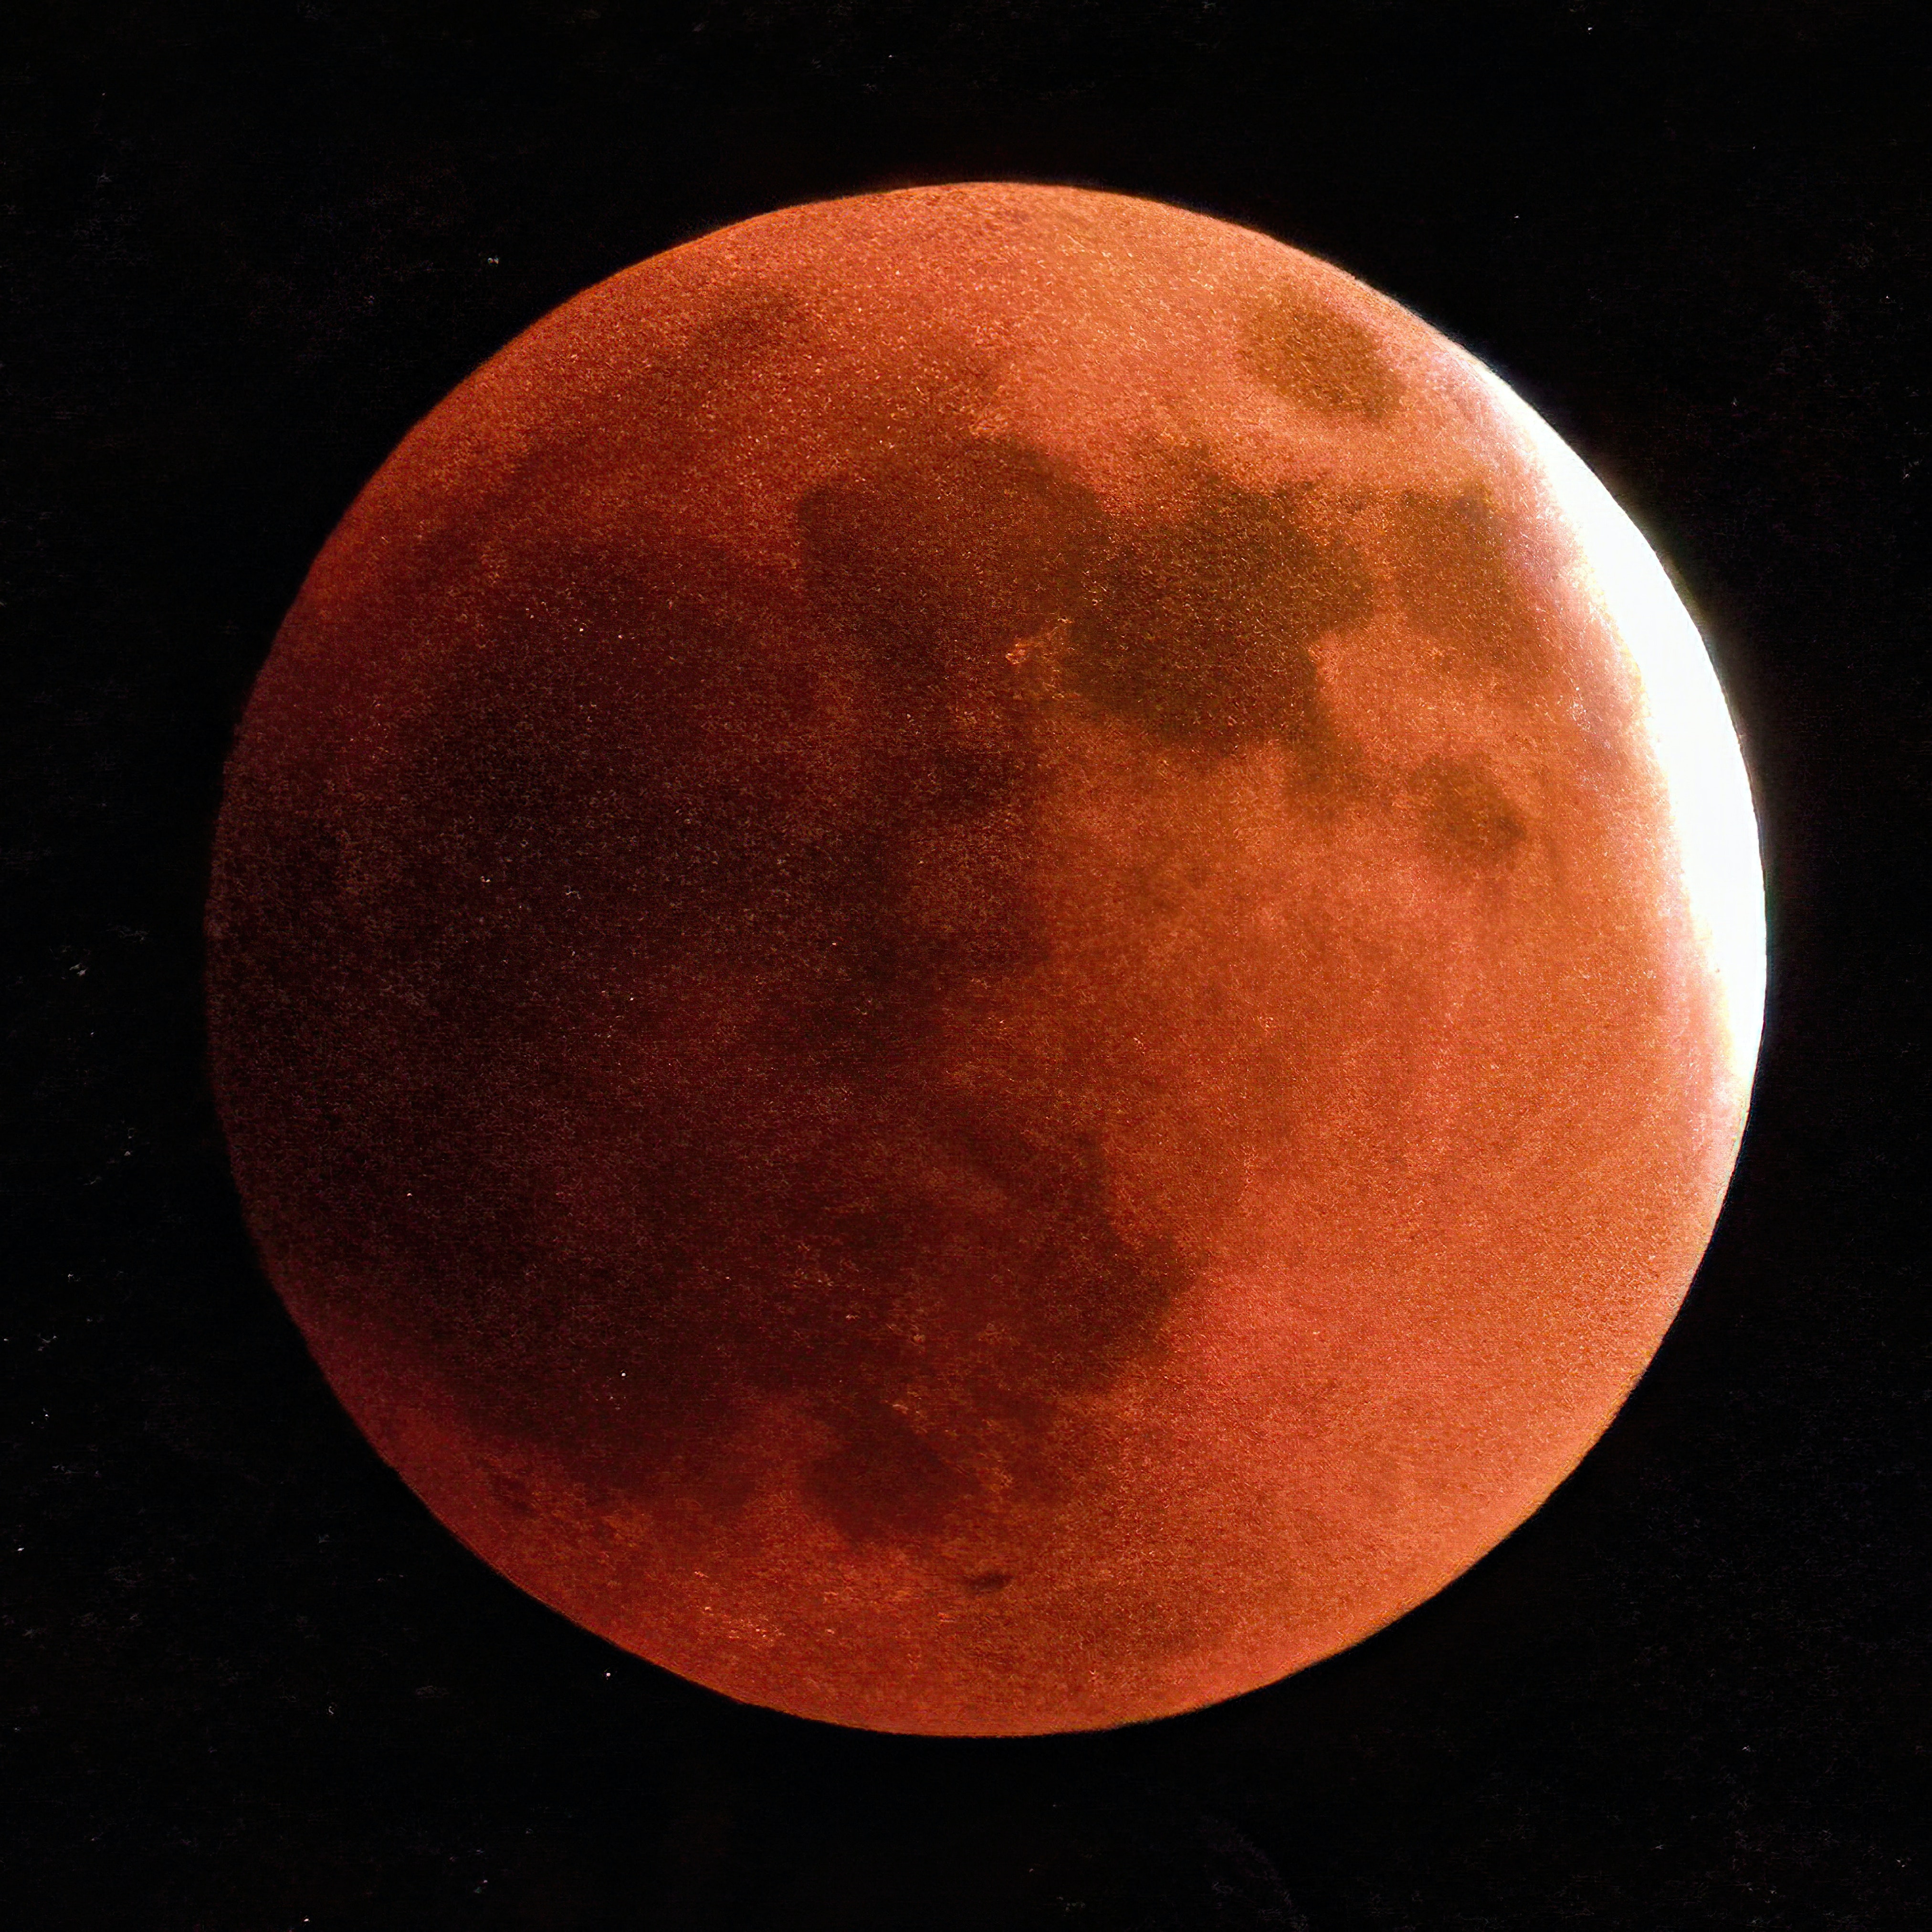 Blood moon photos download the best free blood moon stock photos hd images